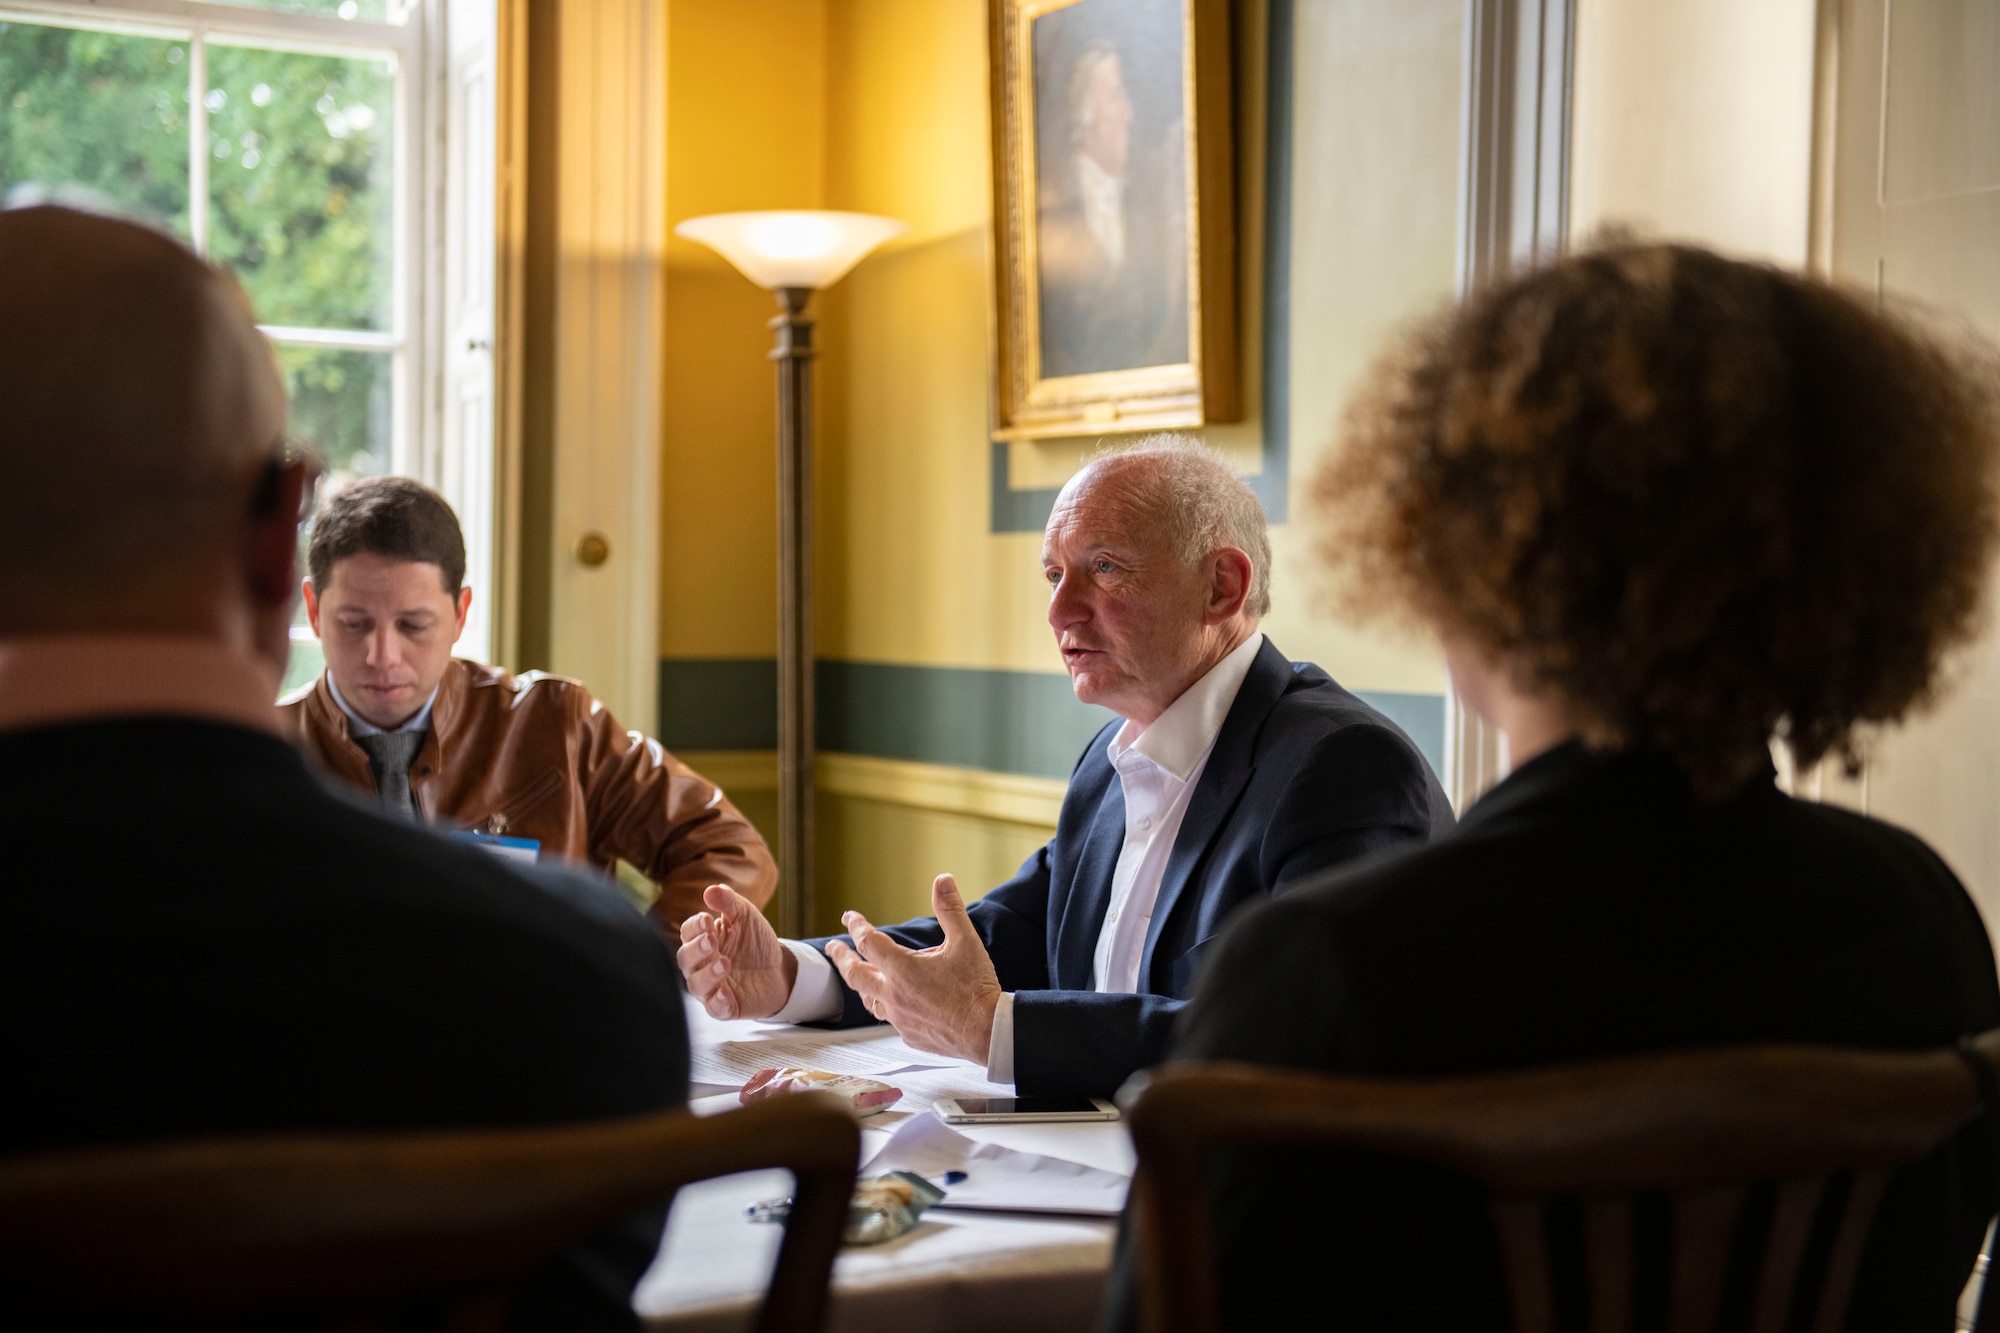 Alan Bookbinder, Downing College master, center, talks with members of the Leadership Connect program